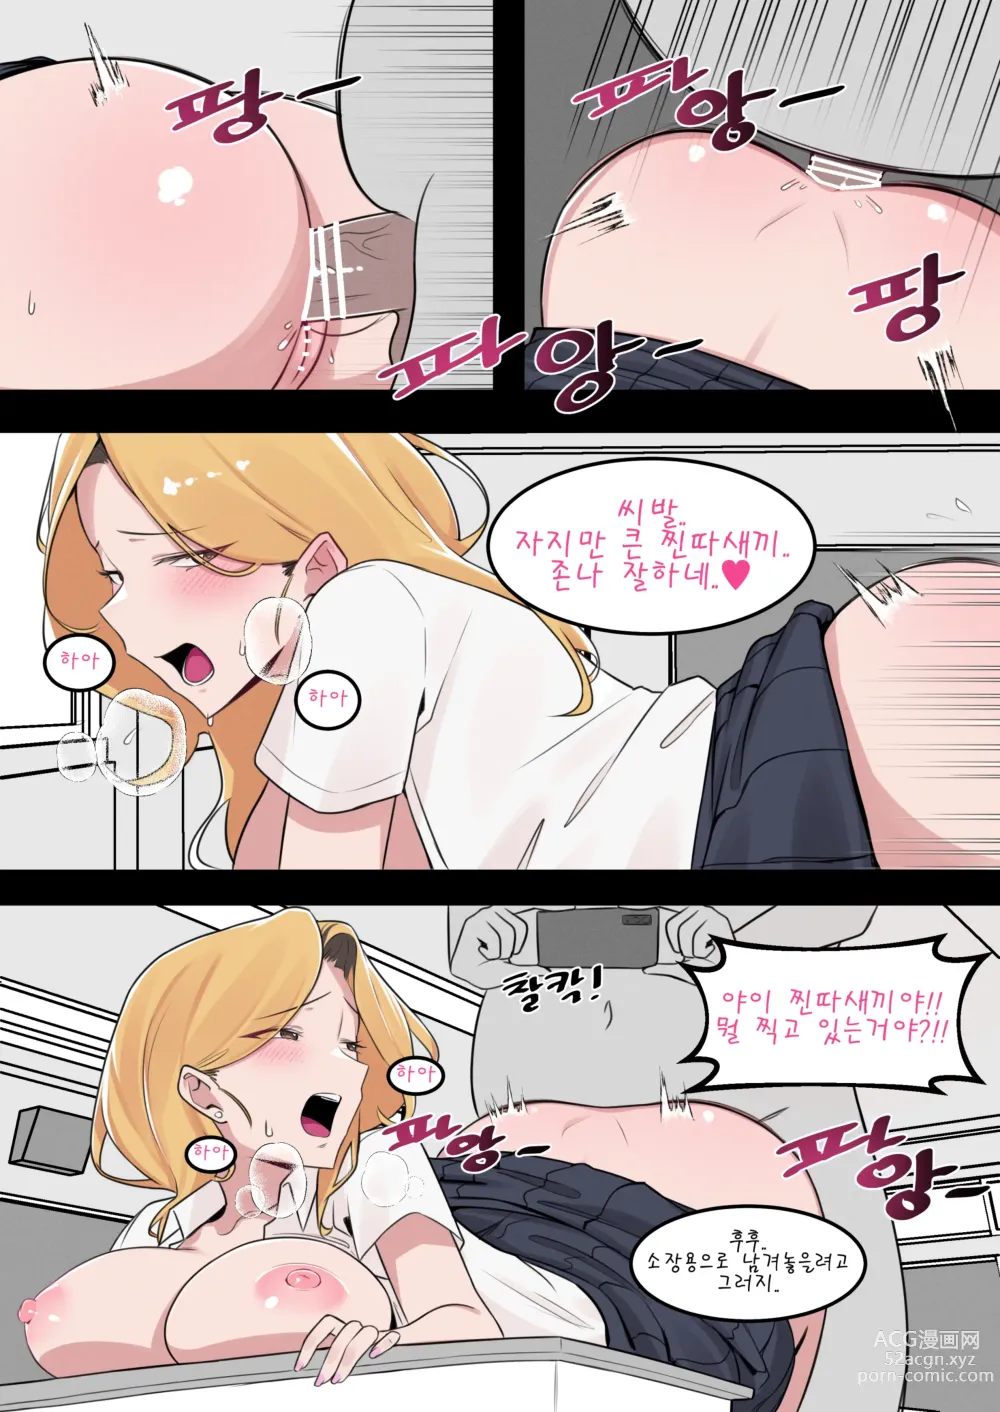 Page 10 of doujinshi After school with Il Jin-nyeo